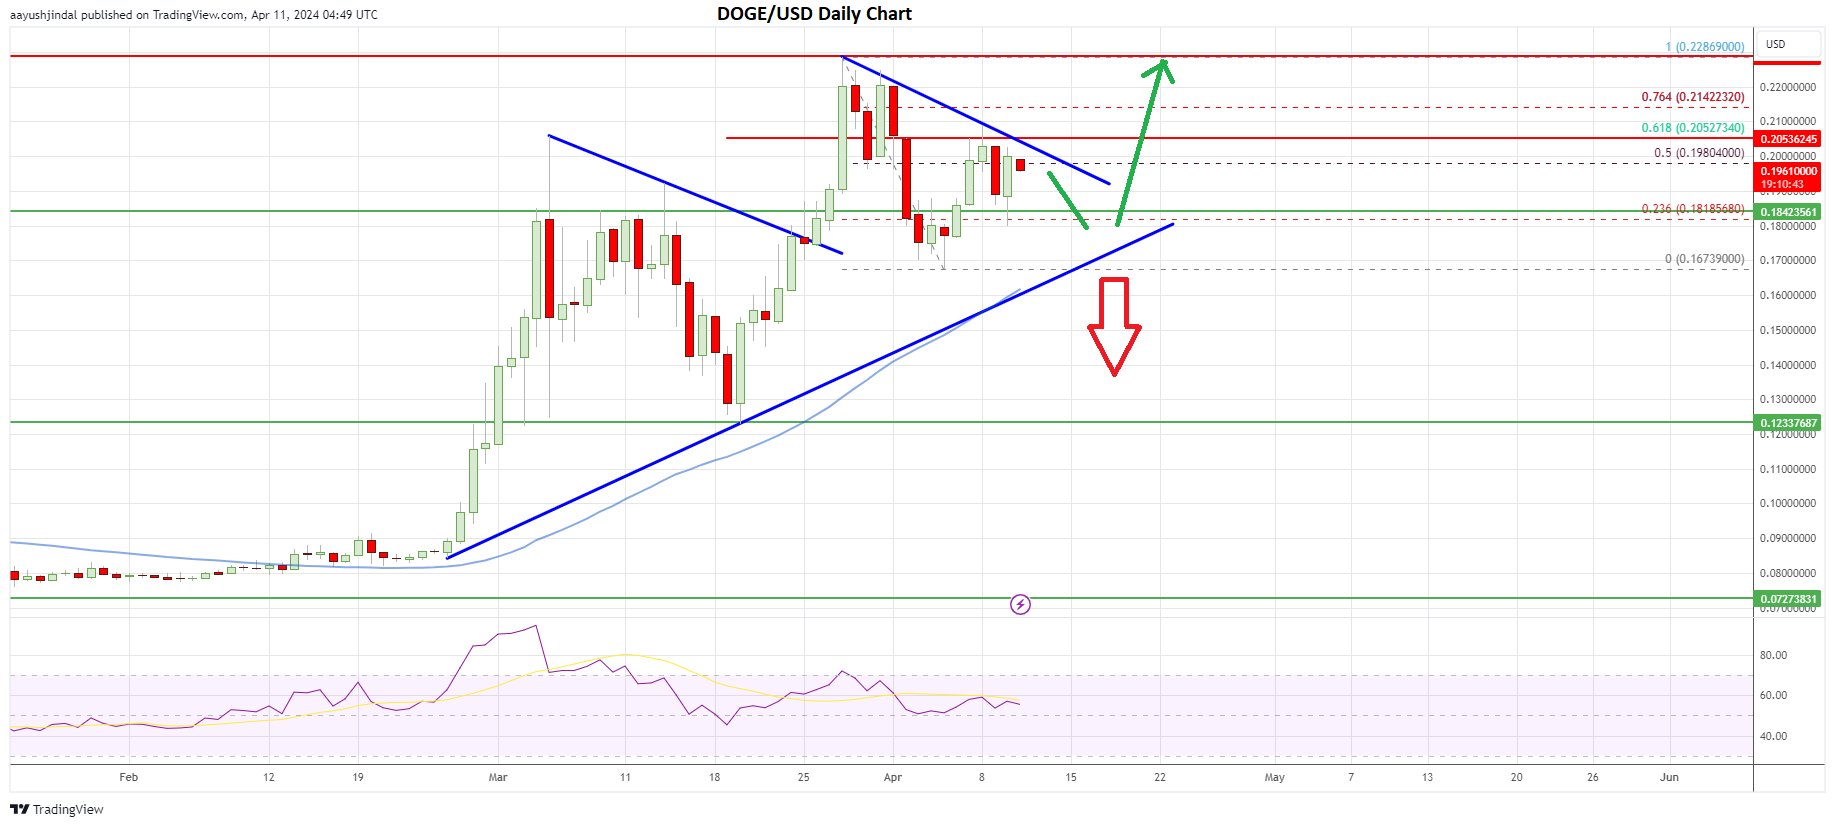 Dogecoin price daily chart | Source: DOGE/USD on TradingView.com